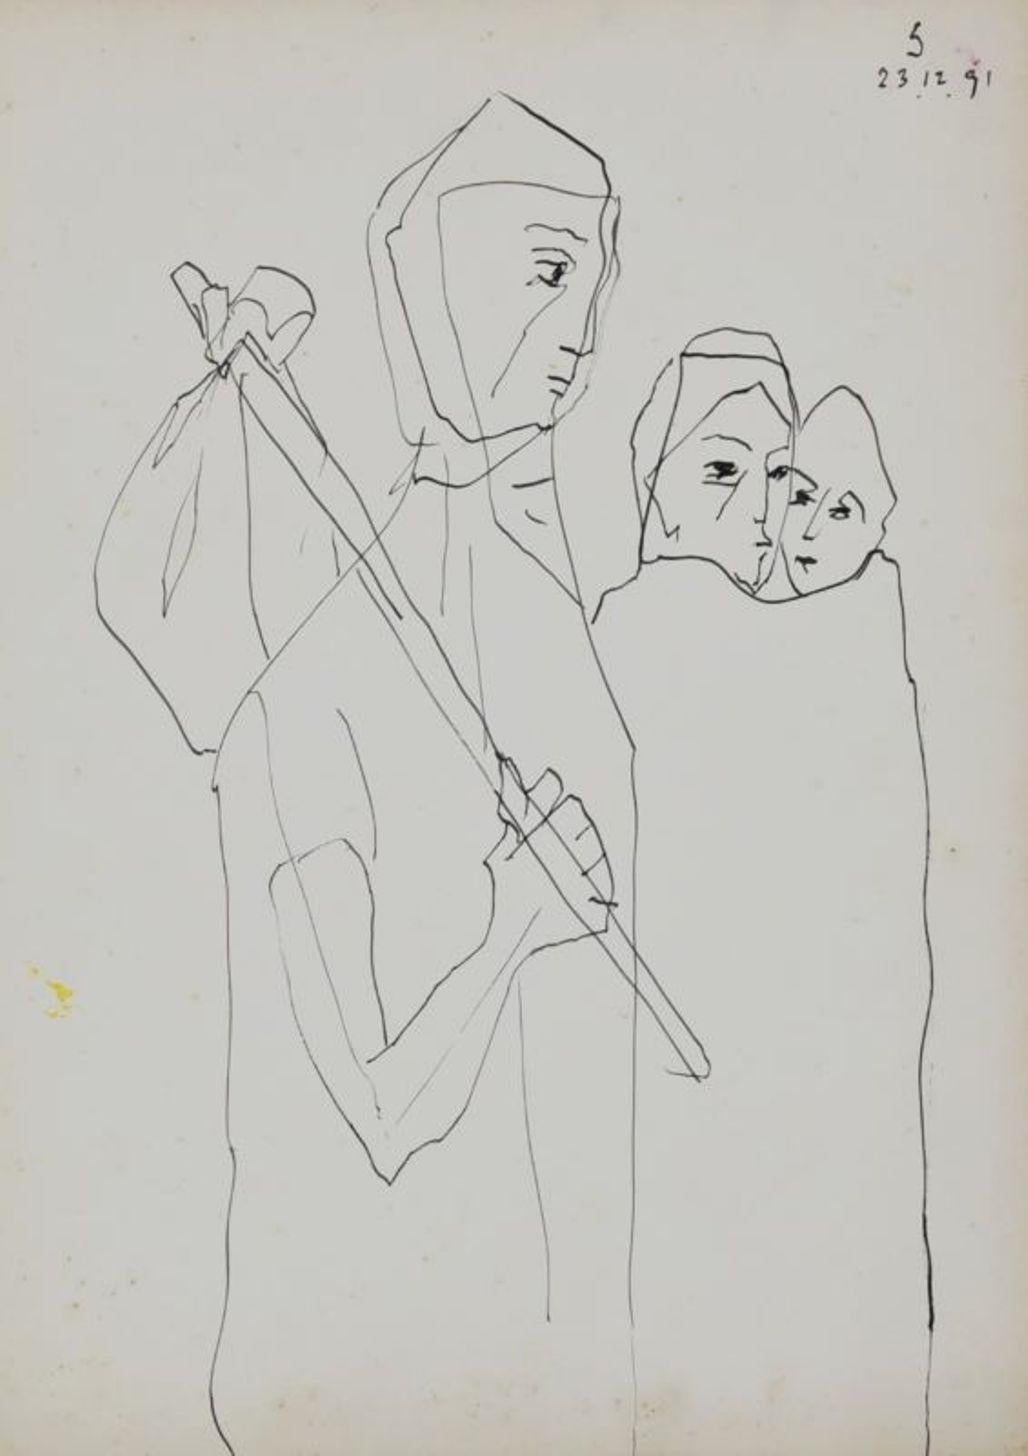 Family, Pen & Ink on Paper by Modern Indian Artist Somnath Hore "In Stock"